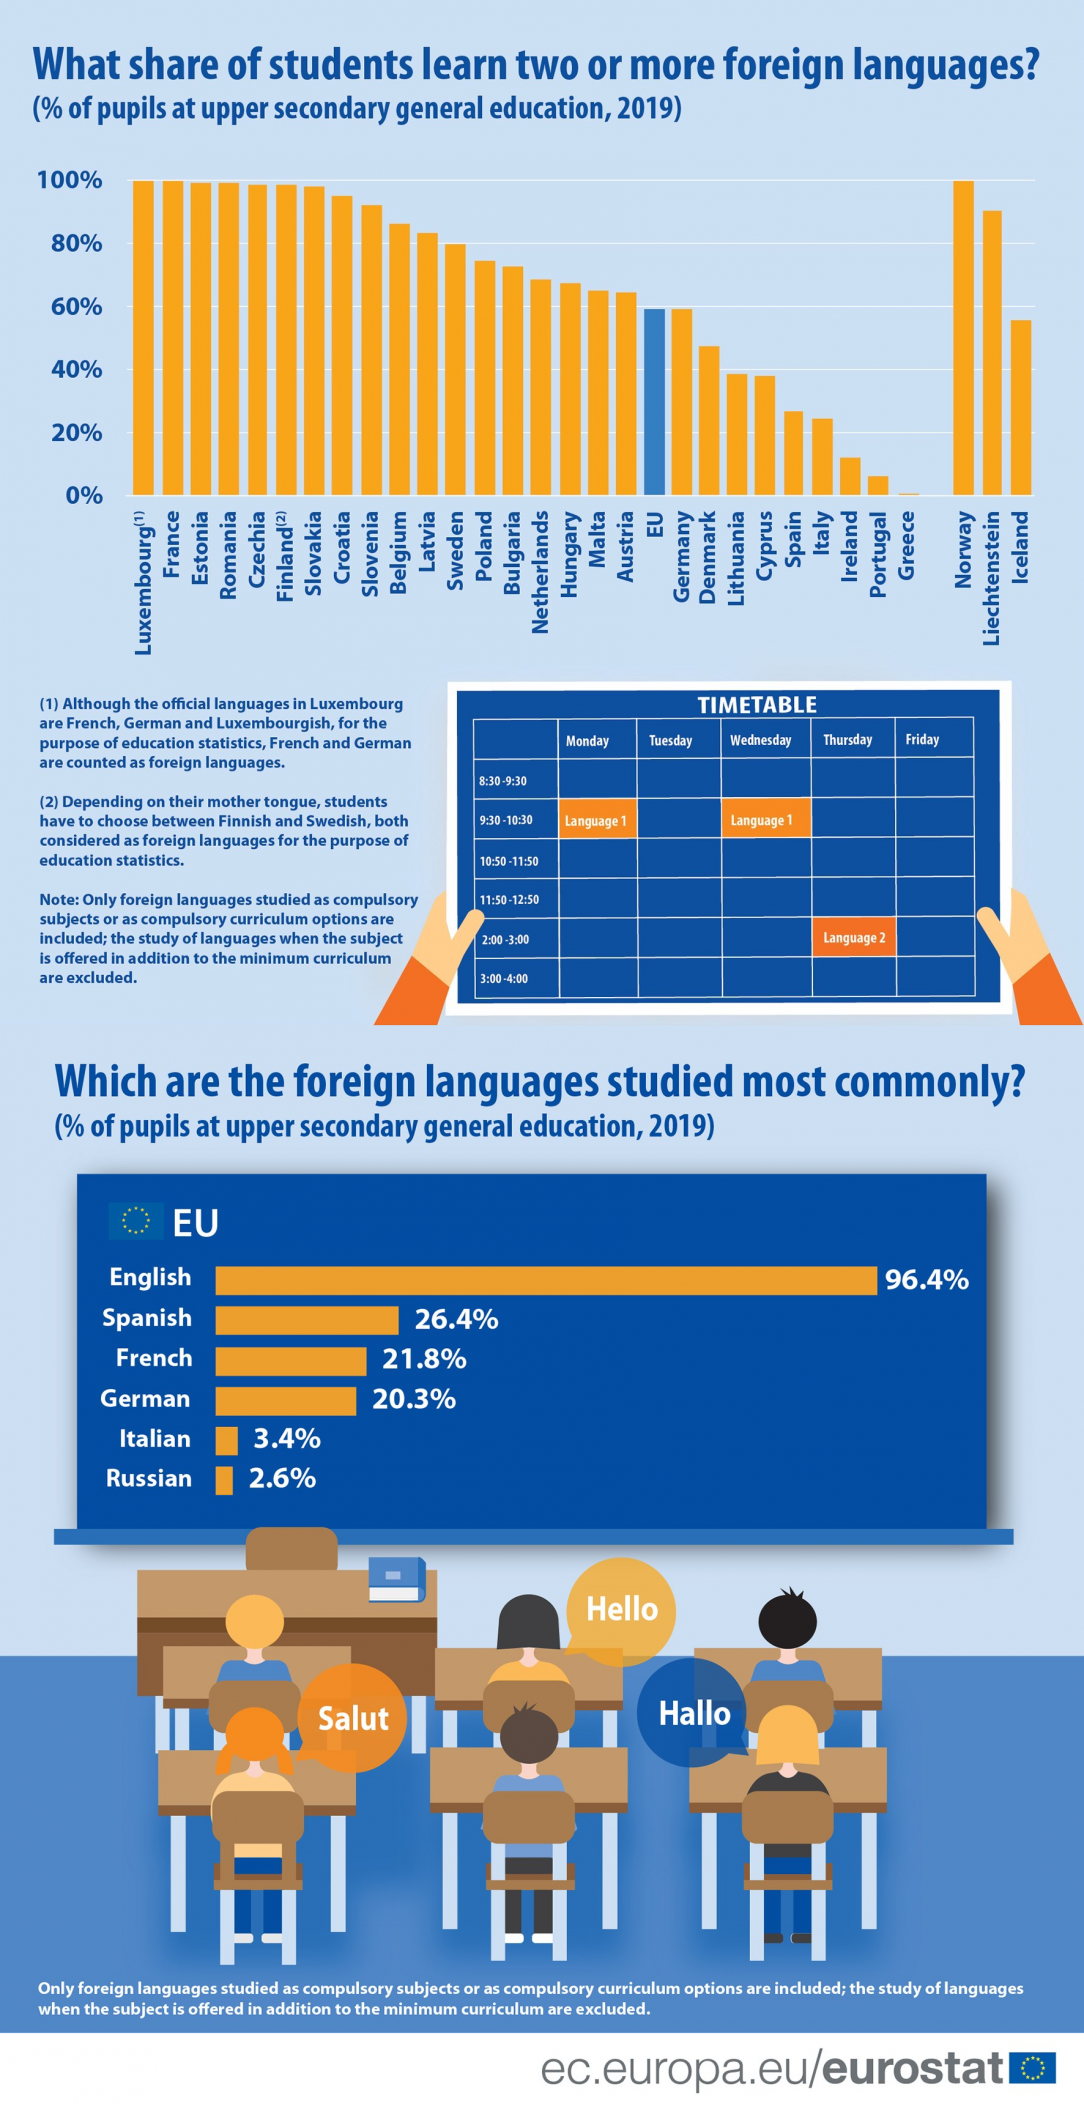 Most studied languages and share of students who learn two or more foreign languages in EU